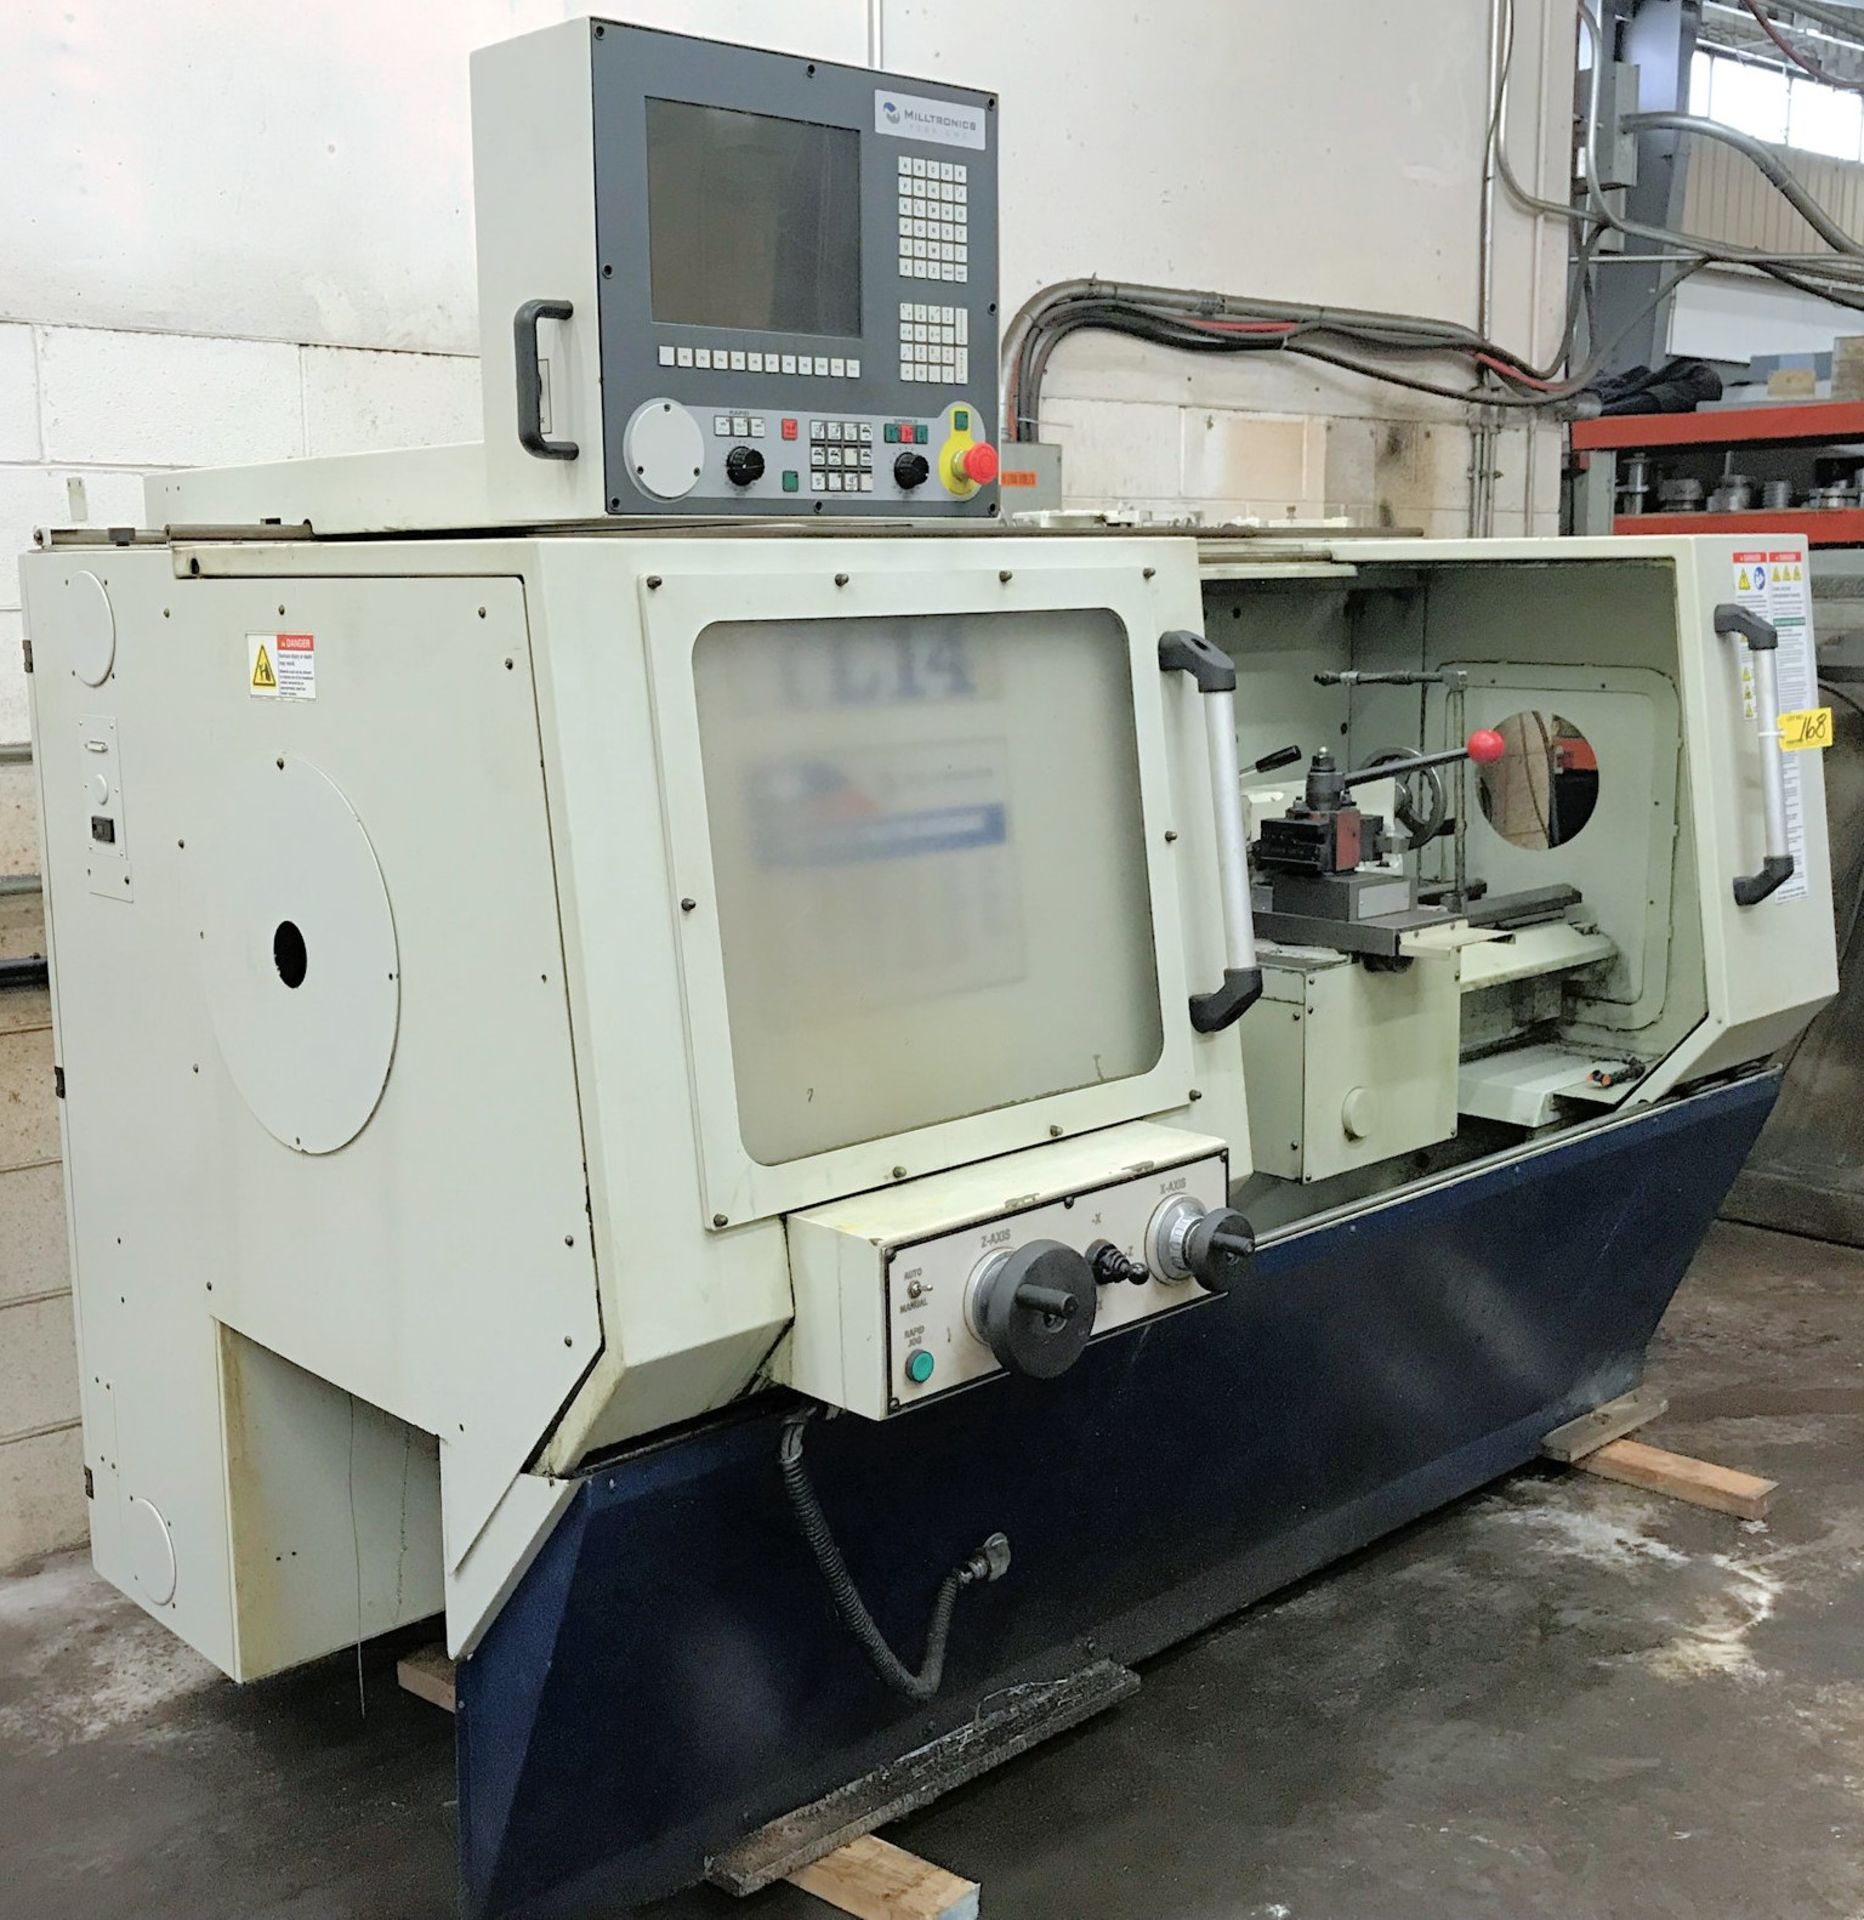 MILLTRONICS TL14 CNC LATHE, 14" SWING OVER BED, 36" BETWEEN CENTERS, 100-3,000 RPM, 12-HP, TOOL - Image 2 of 7